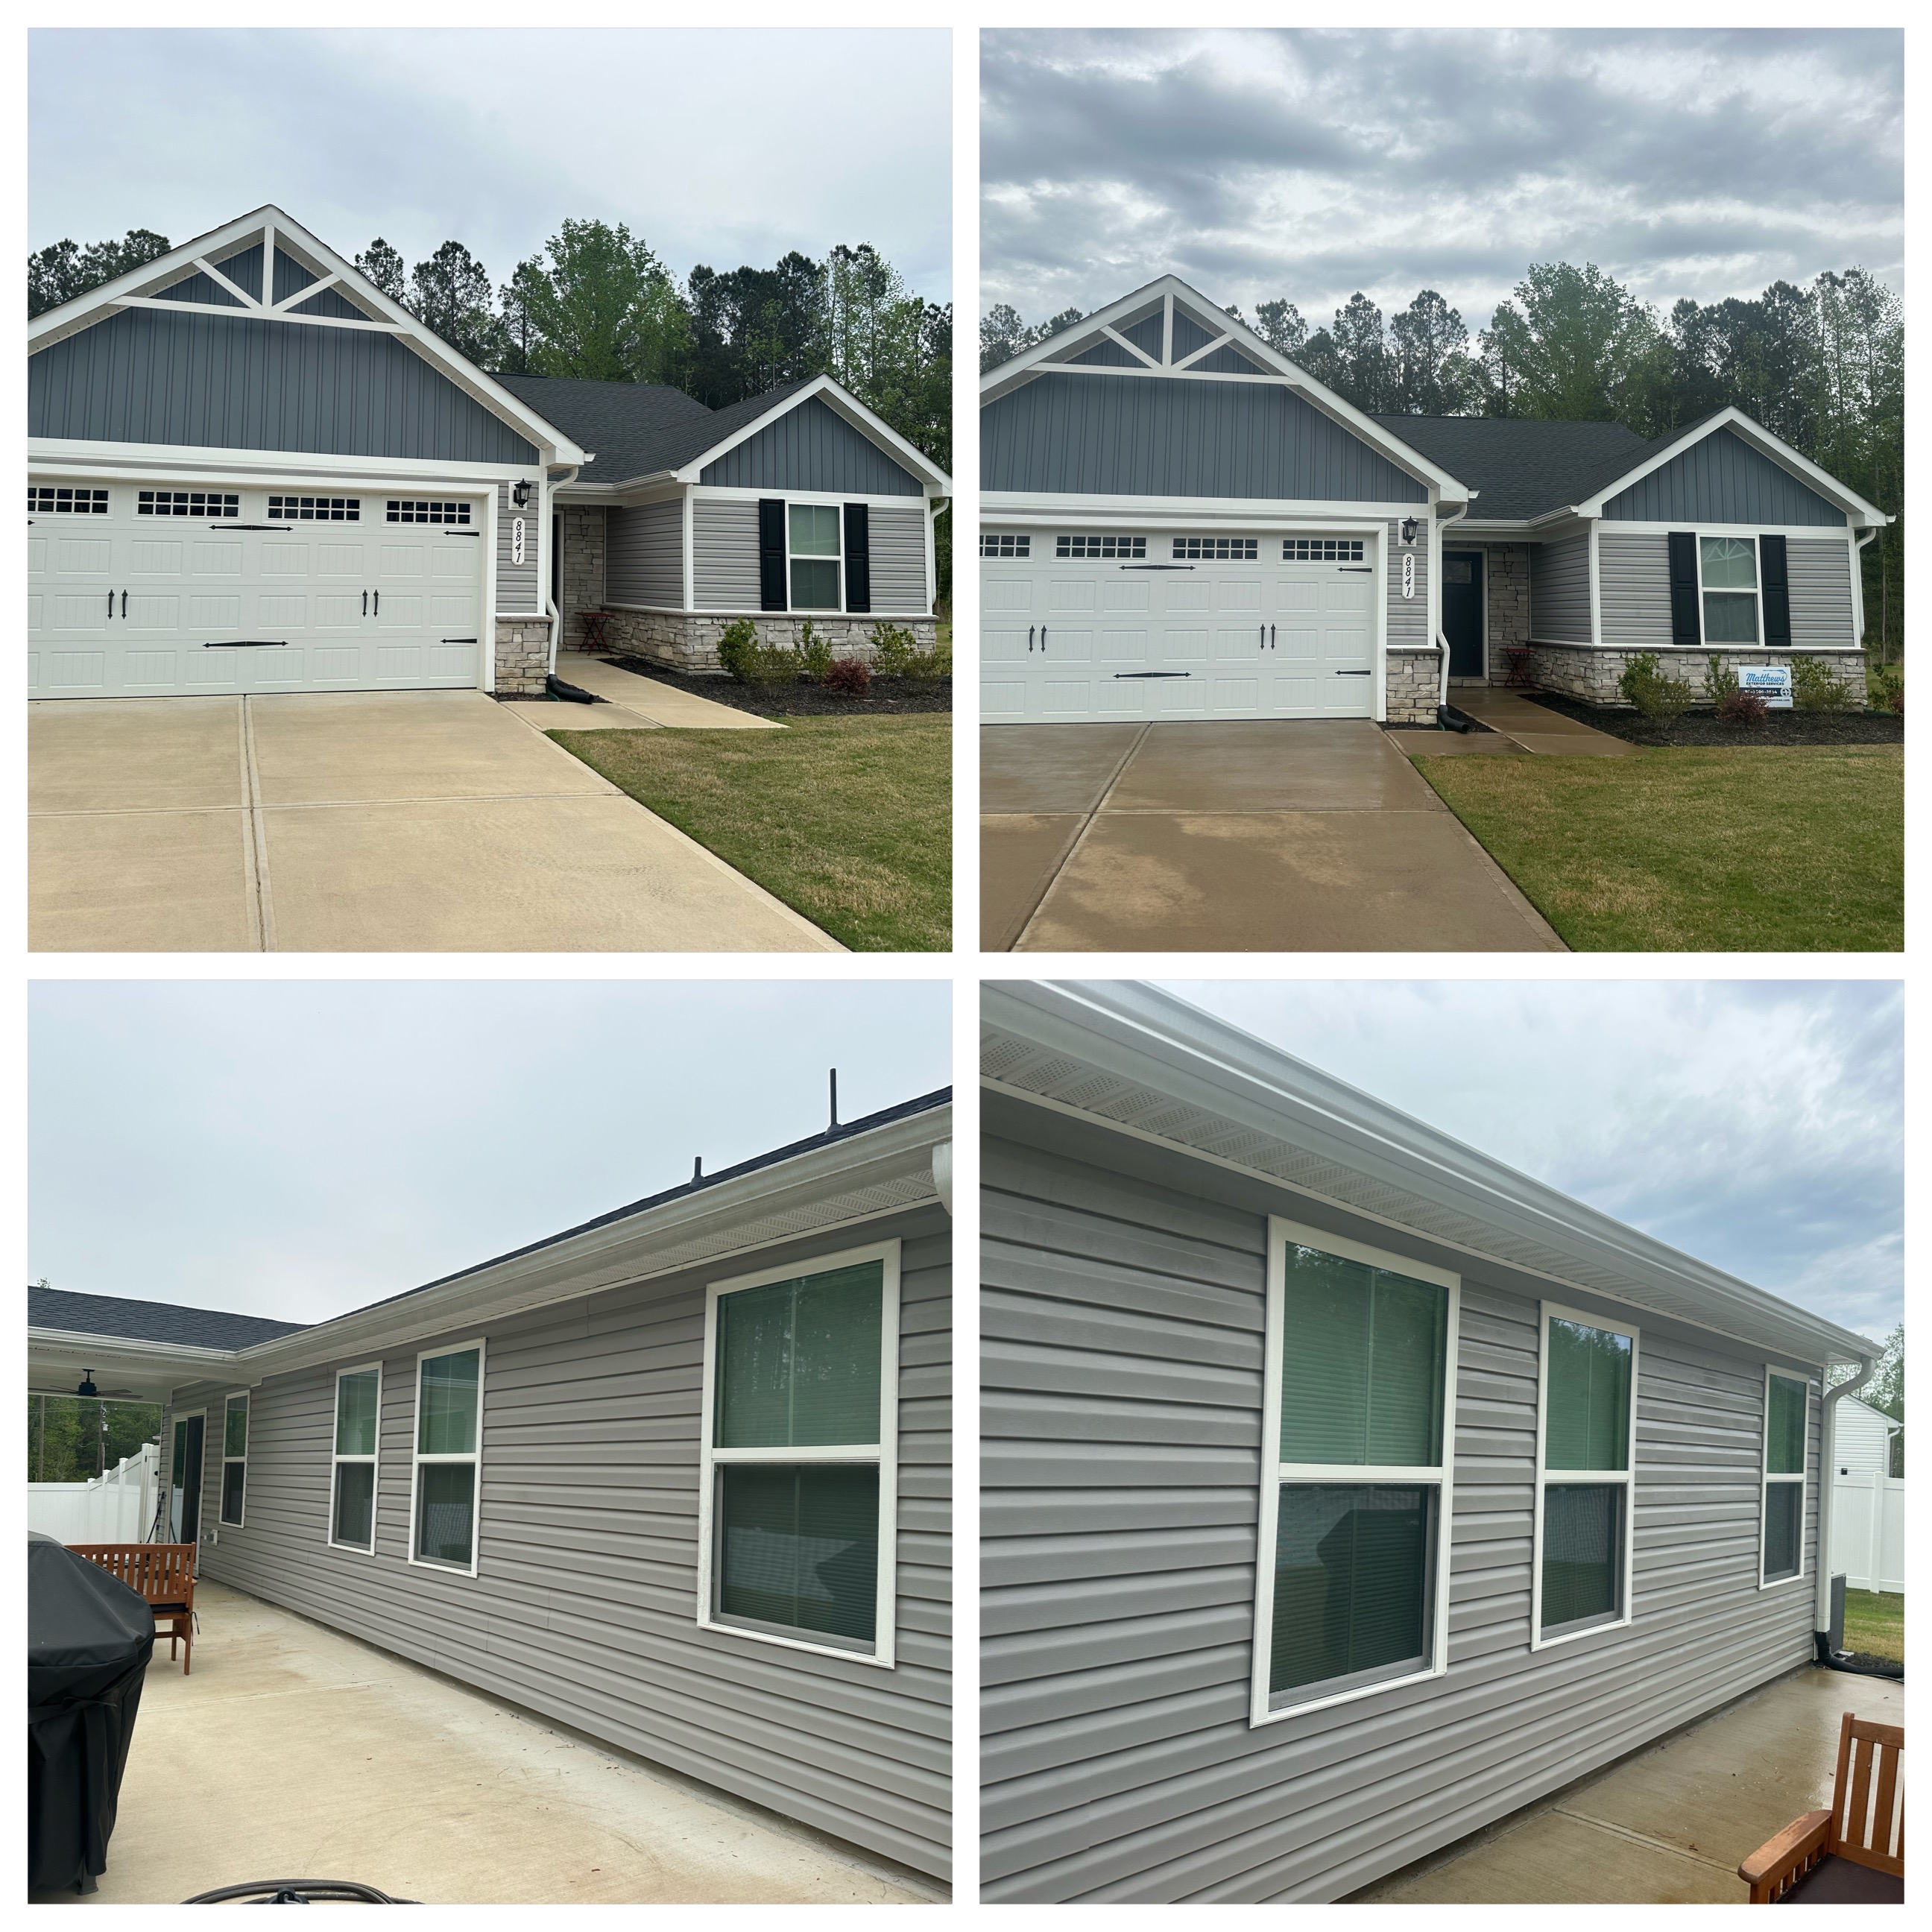 Highly referred exterior cleaning in Fuquay-Varina, North Carolina